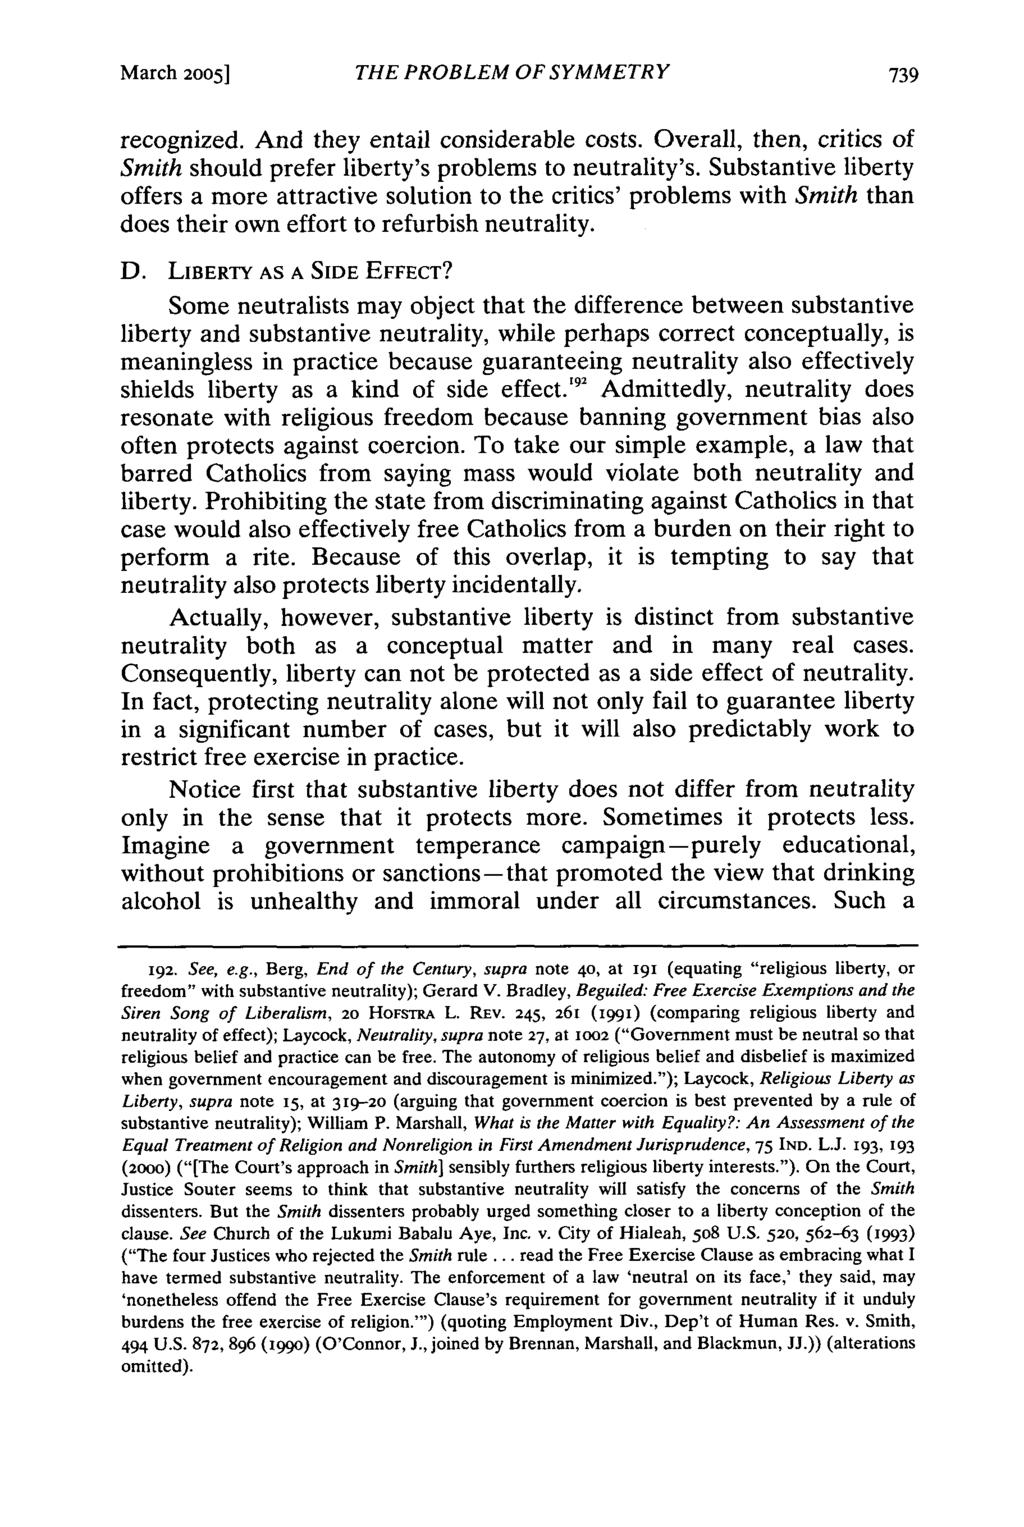 March 2005] THE PROBLEM OF SYMMETRY recognized. And they entail considerable costs. Overall, then, critics of Smith should prefer liberty's problems to neutrality's.